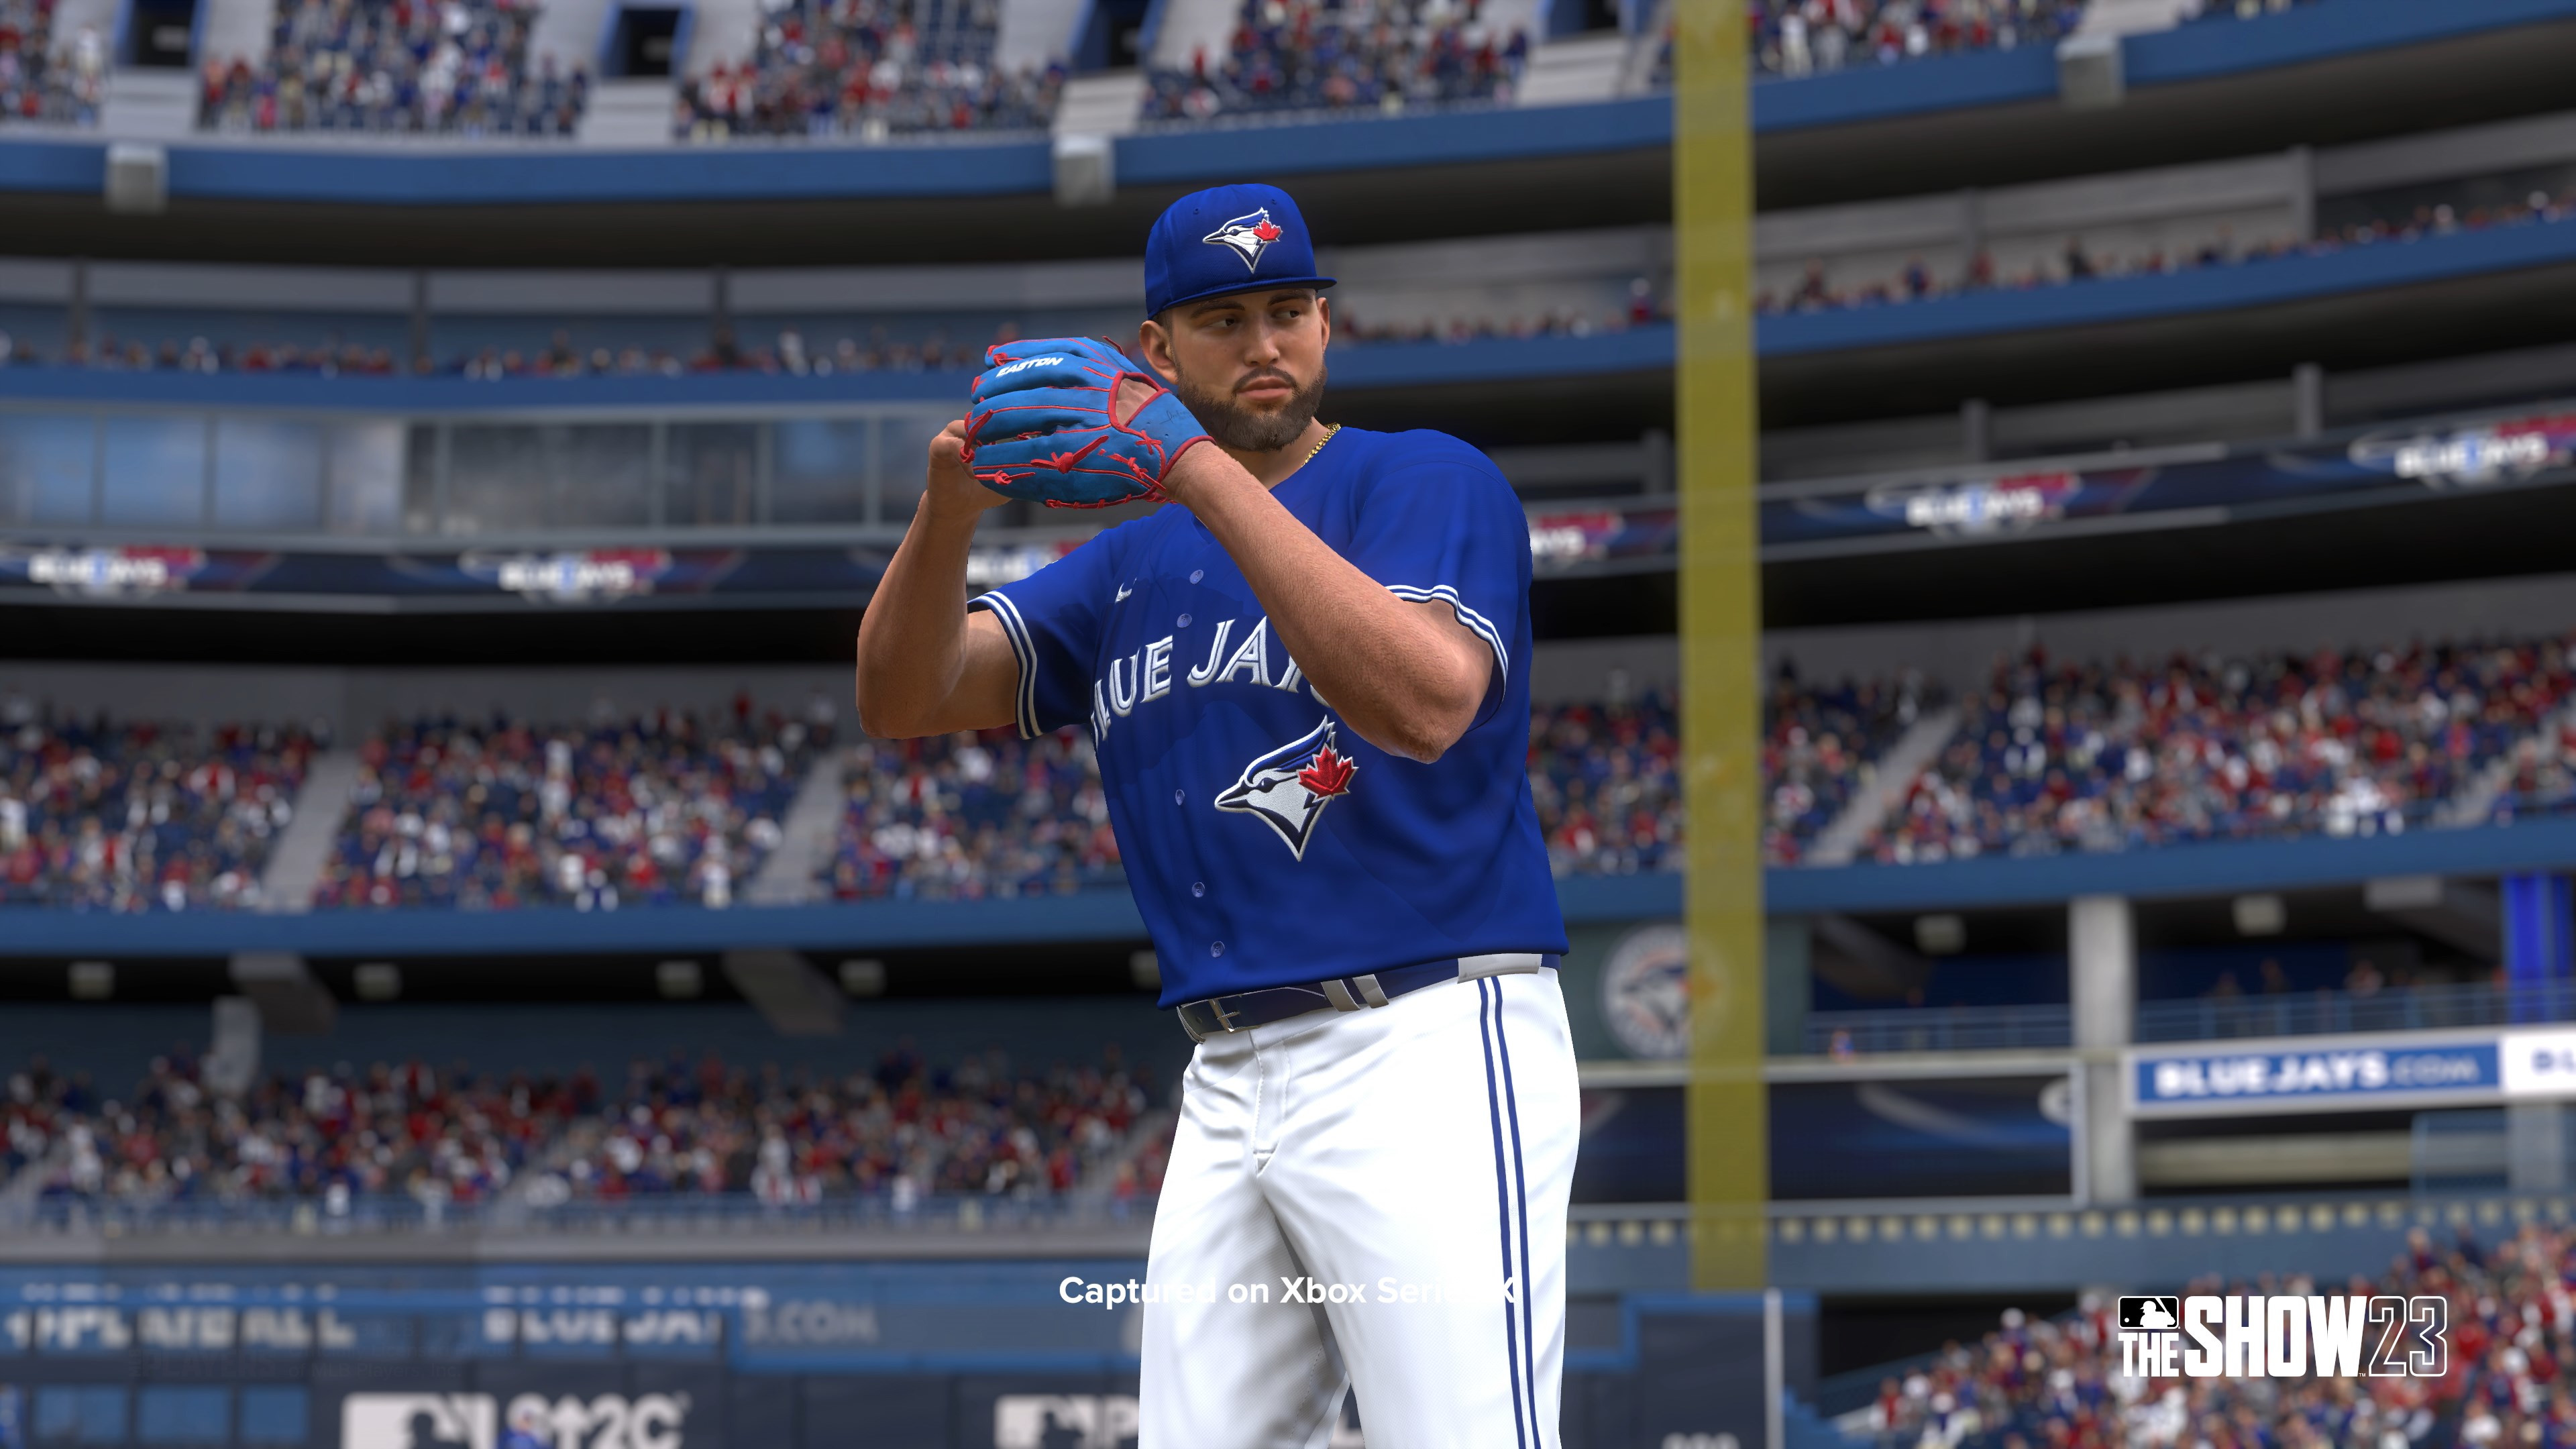 MLB The Show 23 PlayStation 4 Account